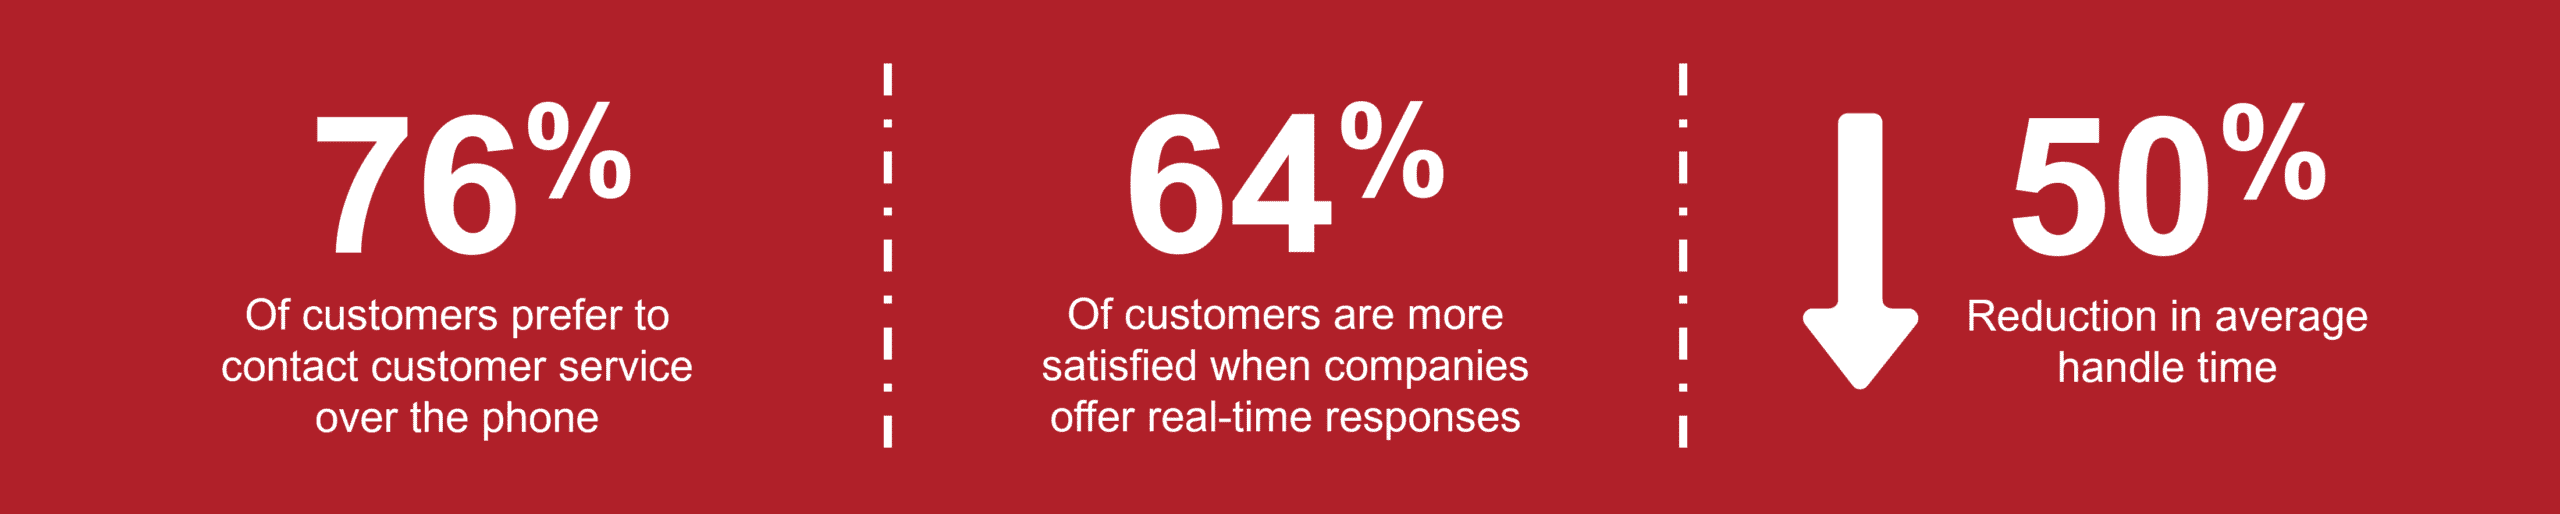 76% of customers prefer to contact customer service over the phone